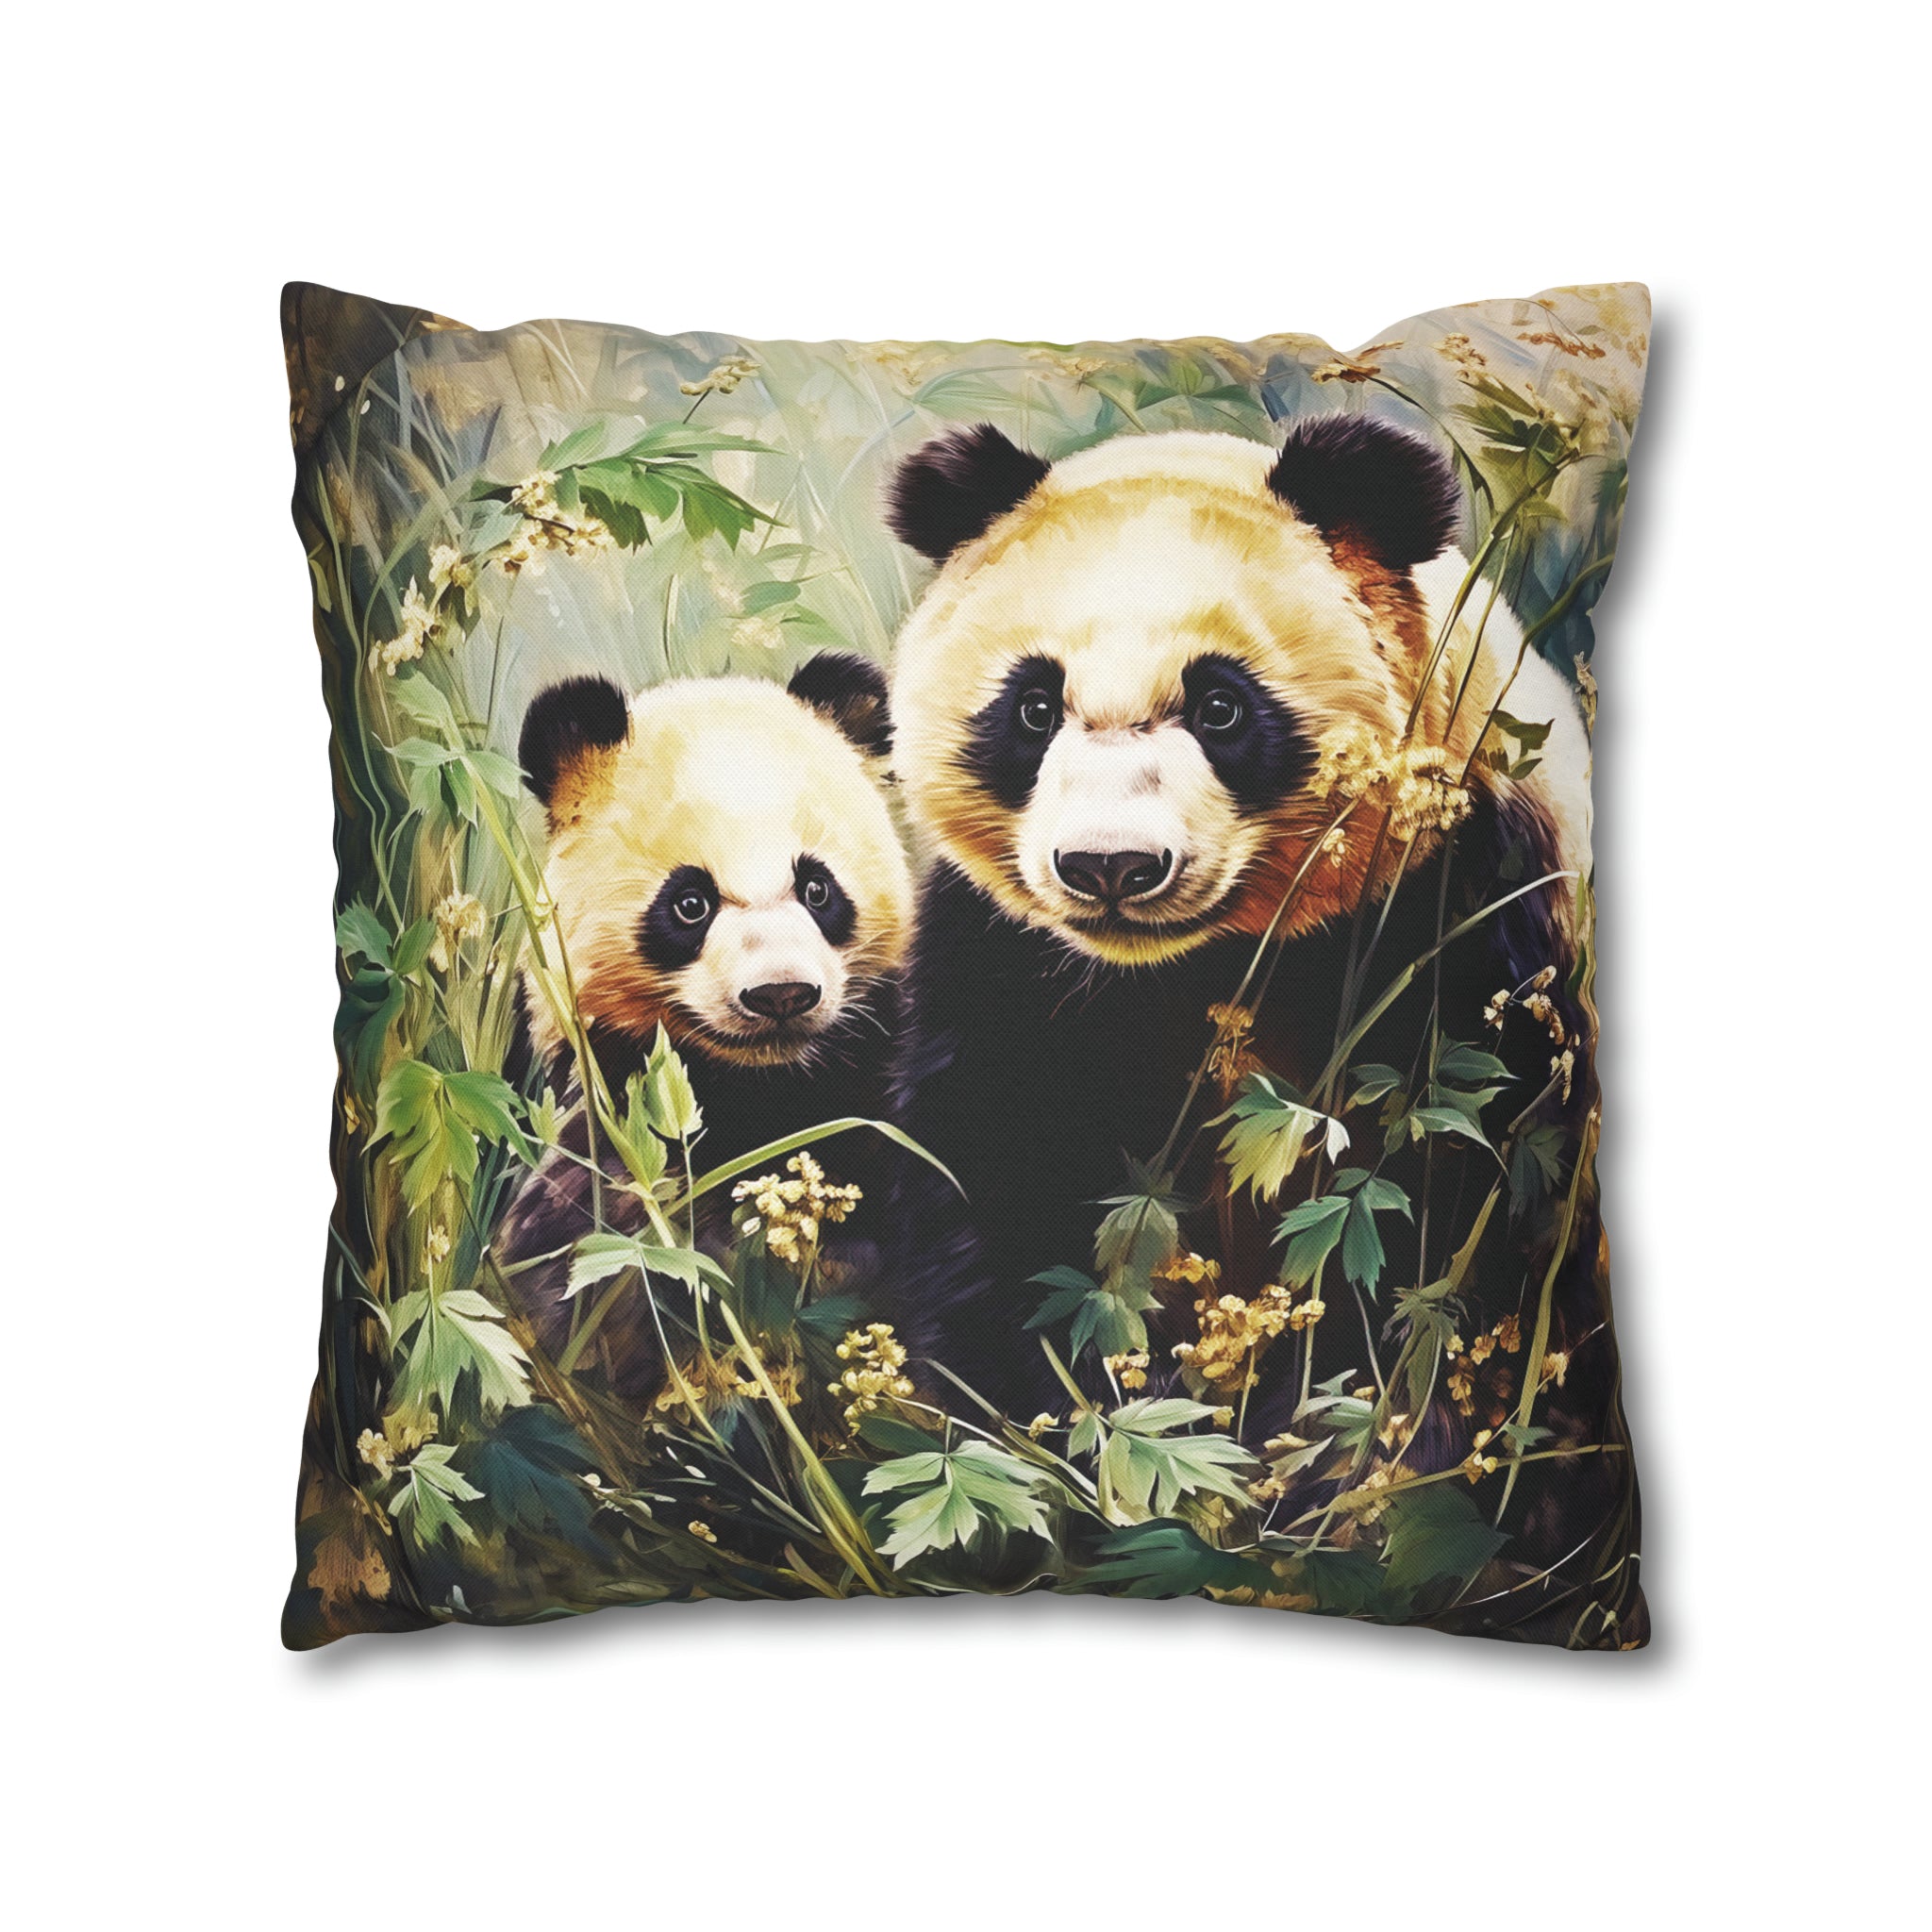 Square Pillow Case 18" x 18", CASE ONLY, no pillow form, original Art , A Mother Panda Bear and Her Cub in the Forest